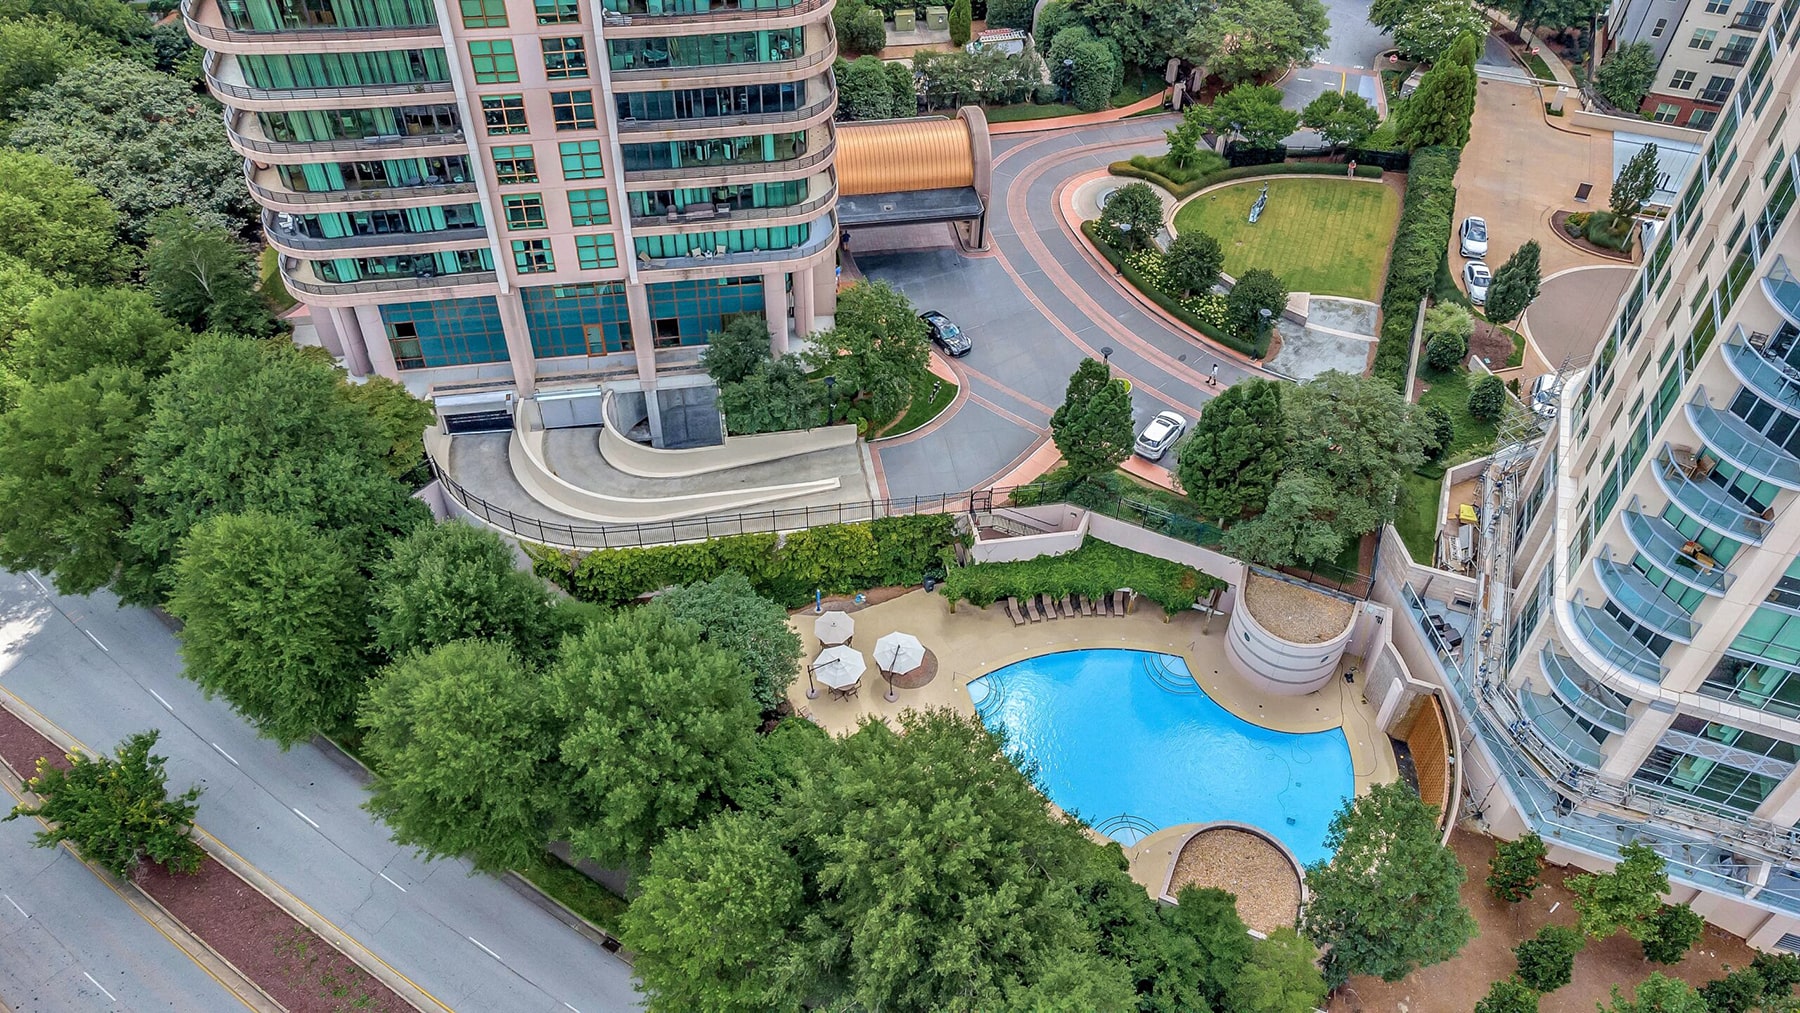 Drone view of two buildings, a swimming pool, trees and on-campus roads